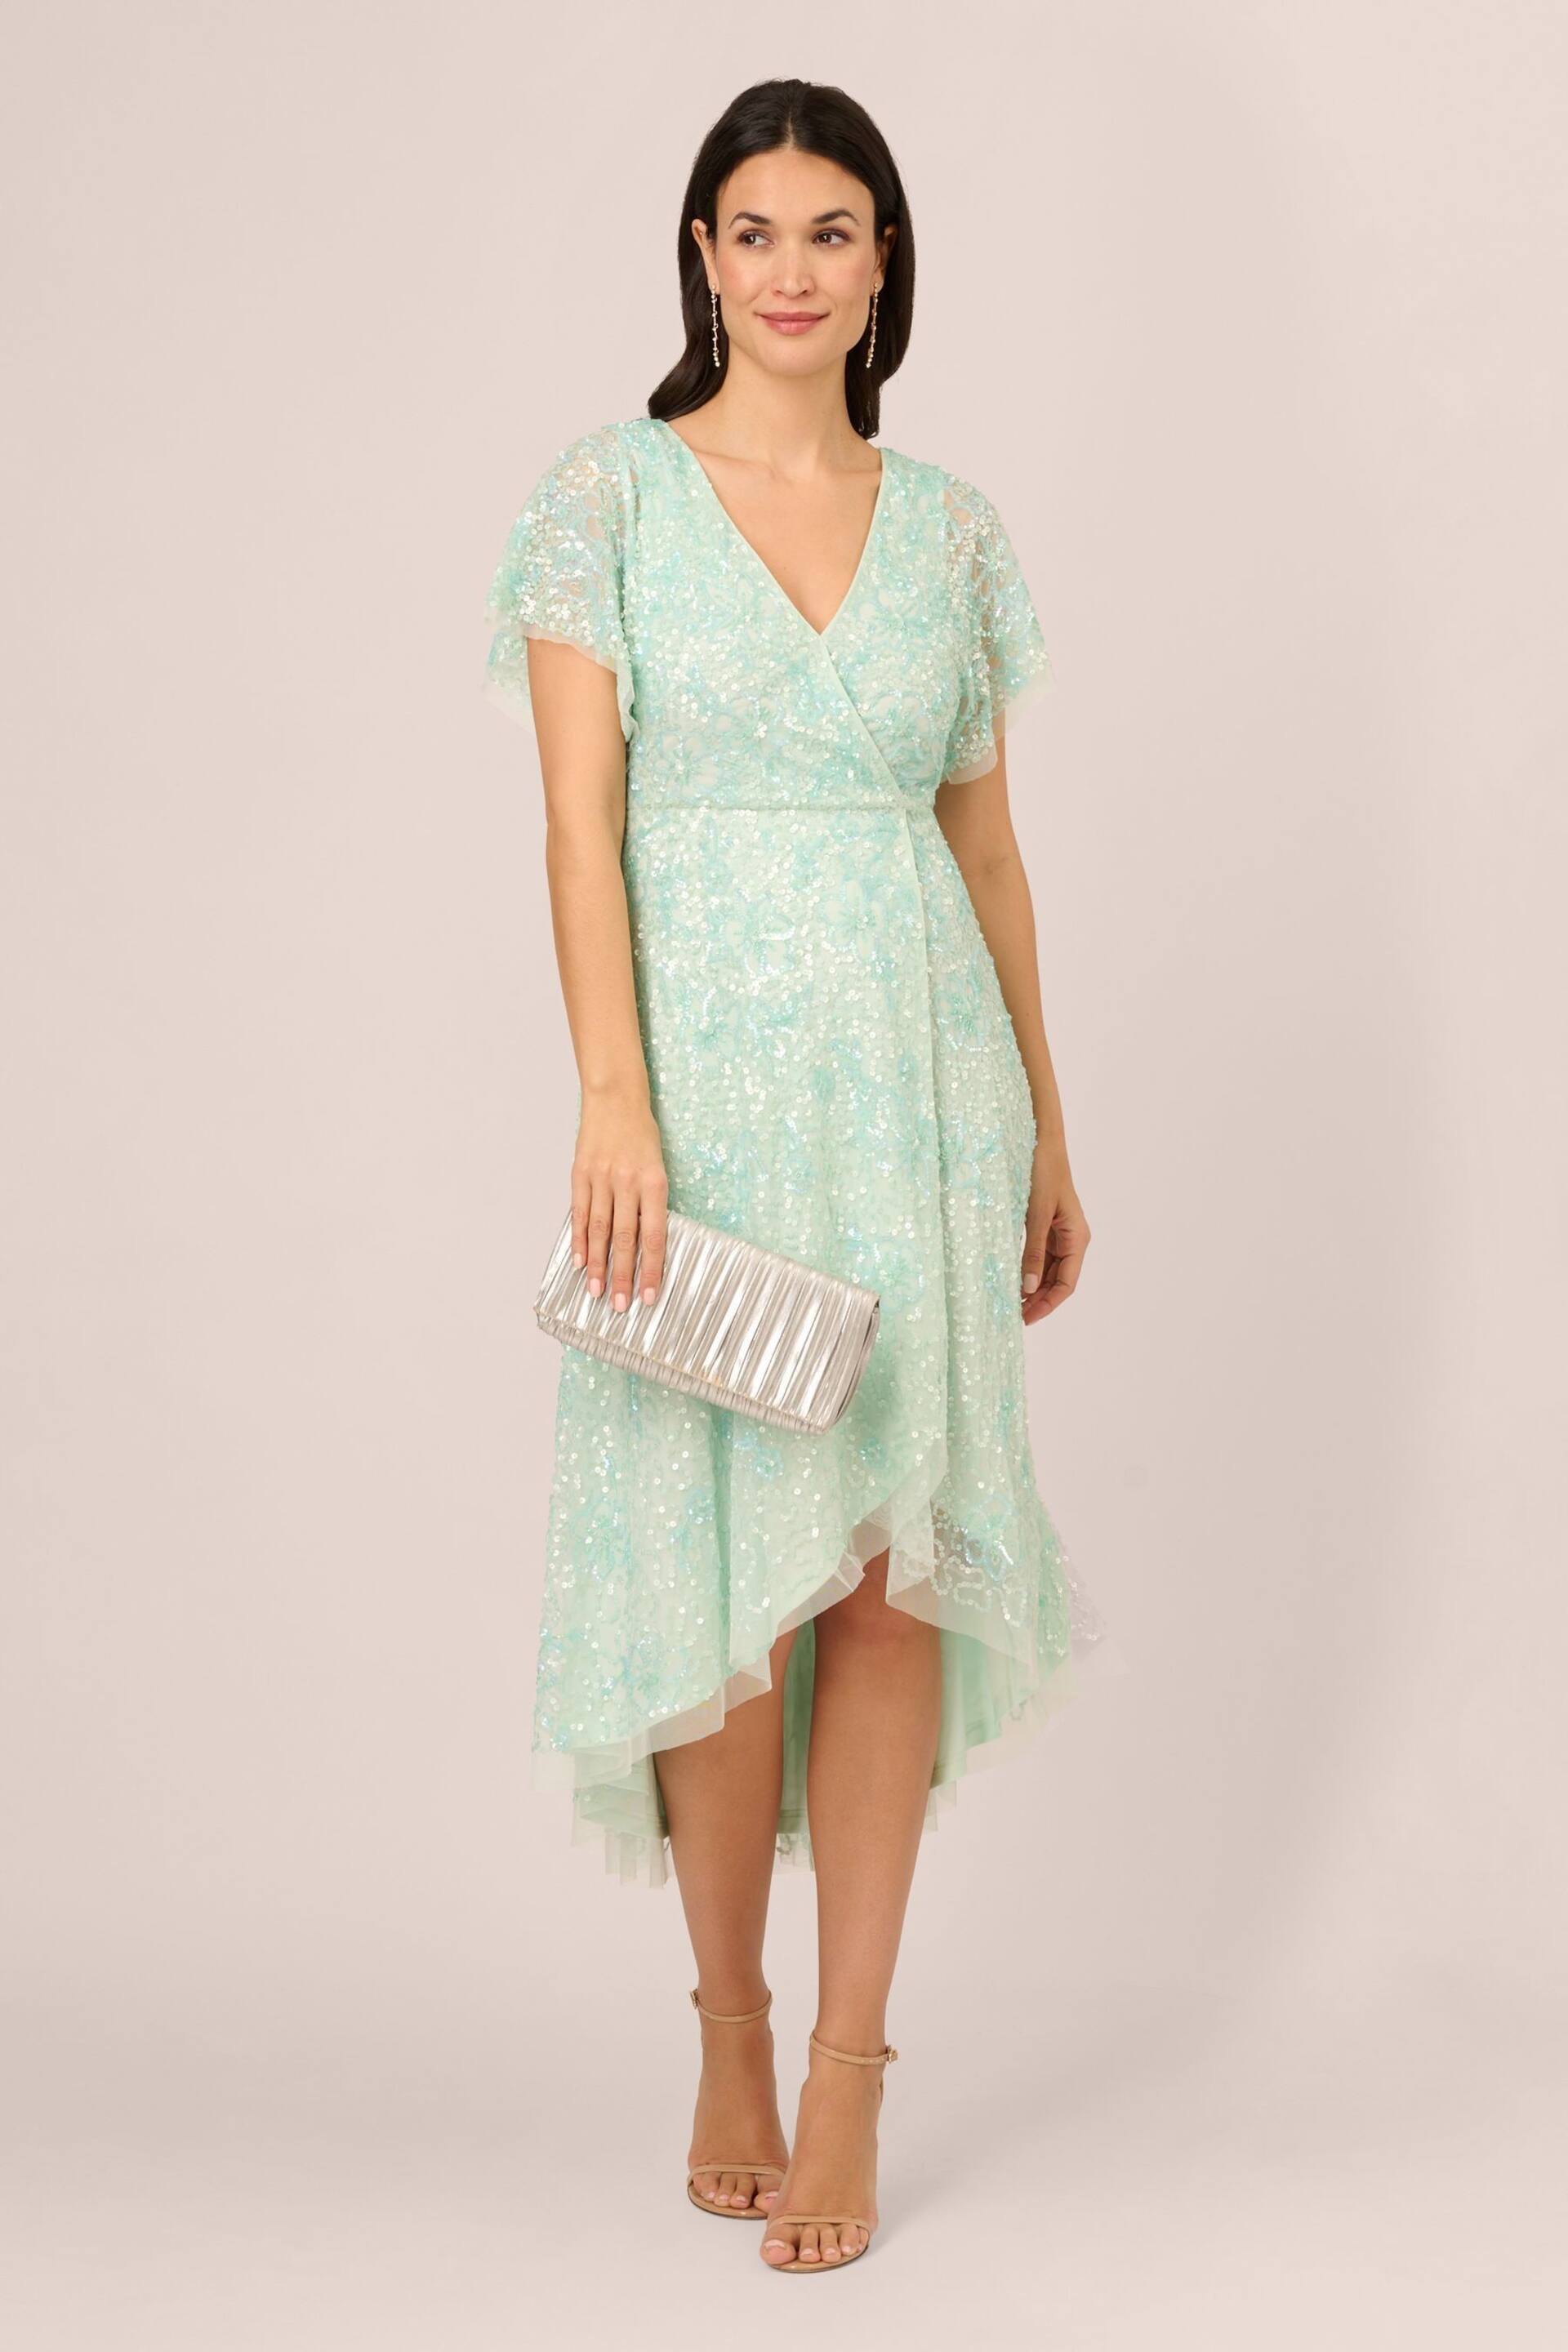 Adrianna Papell Green Beaded Mesh Wrap Dress - Image 3 of 7